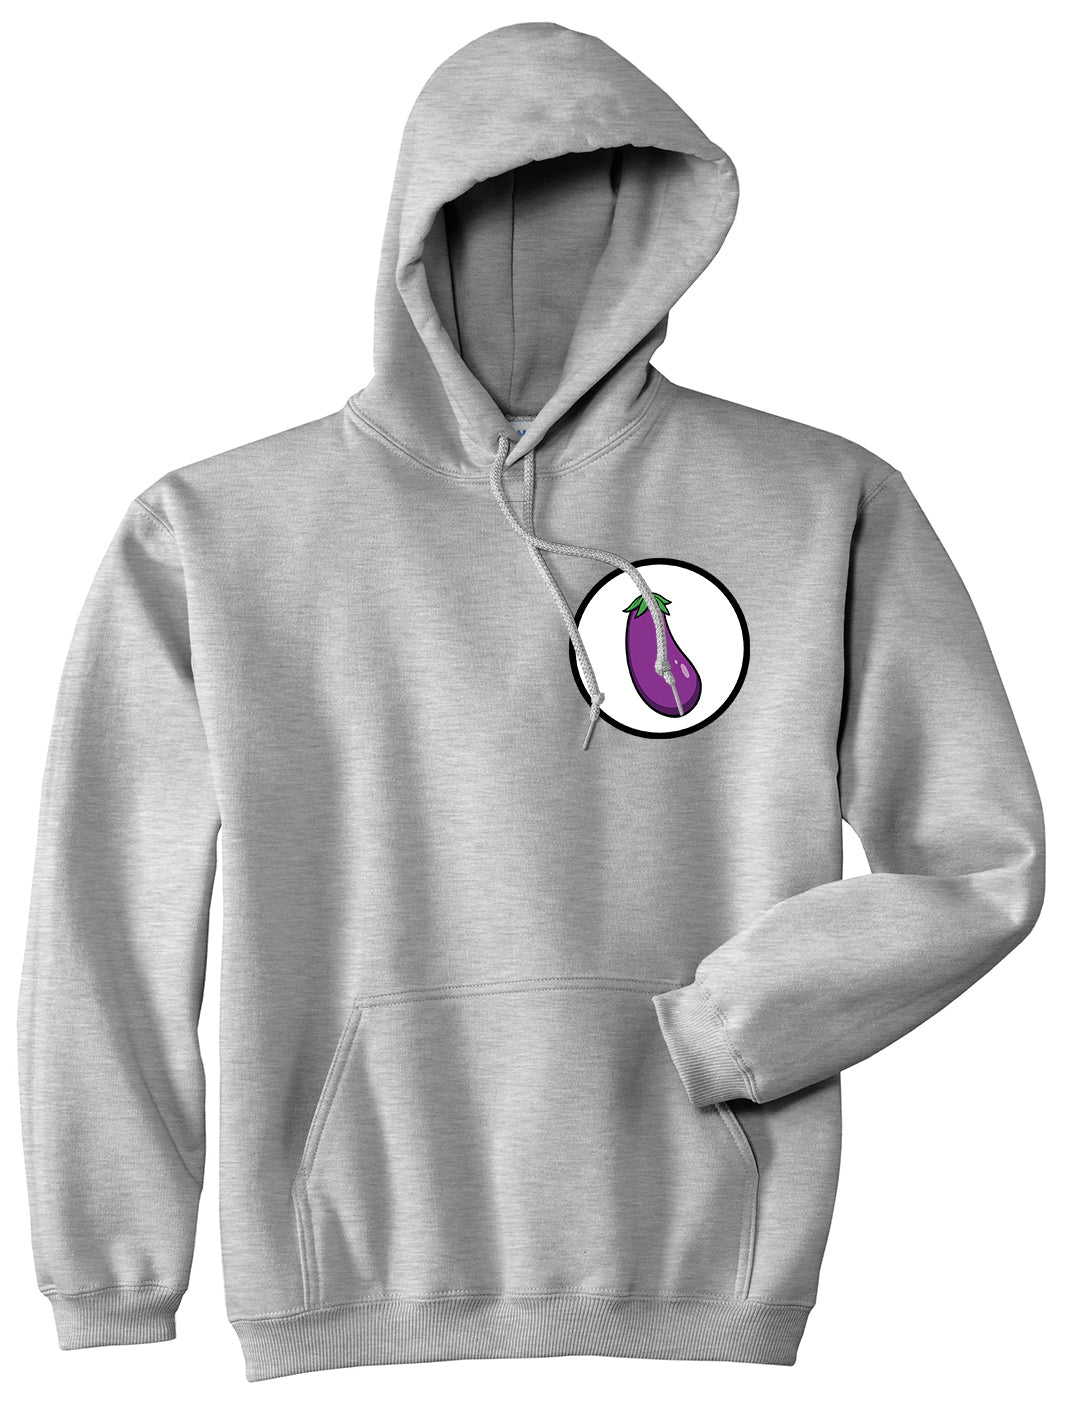 Eggplant Emoji Chest Mens Grey Pullover Hoodie by Kings Of NY